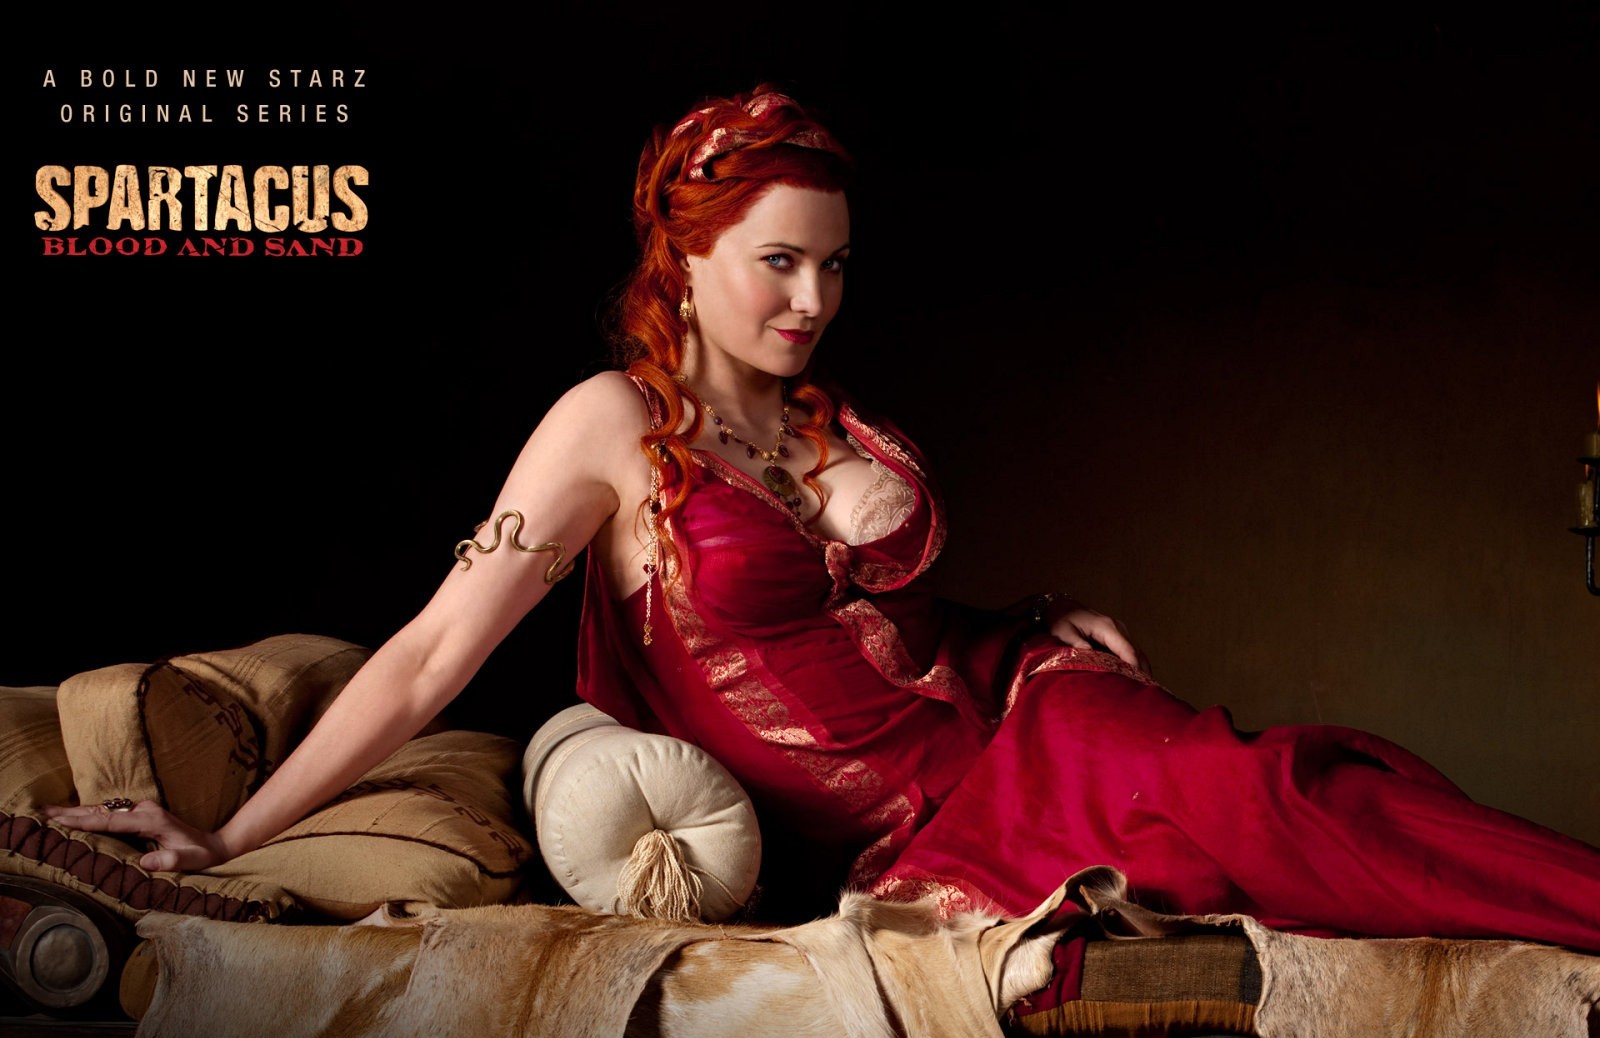 alfredo rey recommends lucy lawless spartacus scene pic